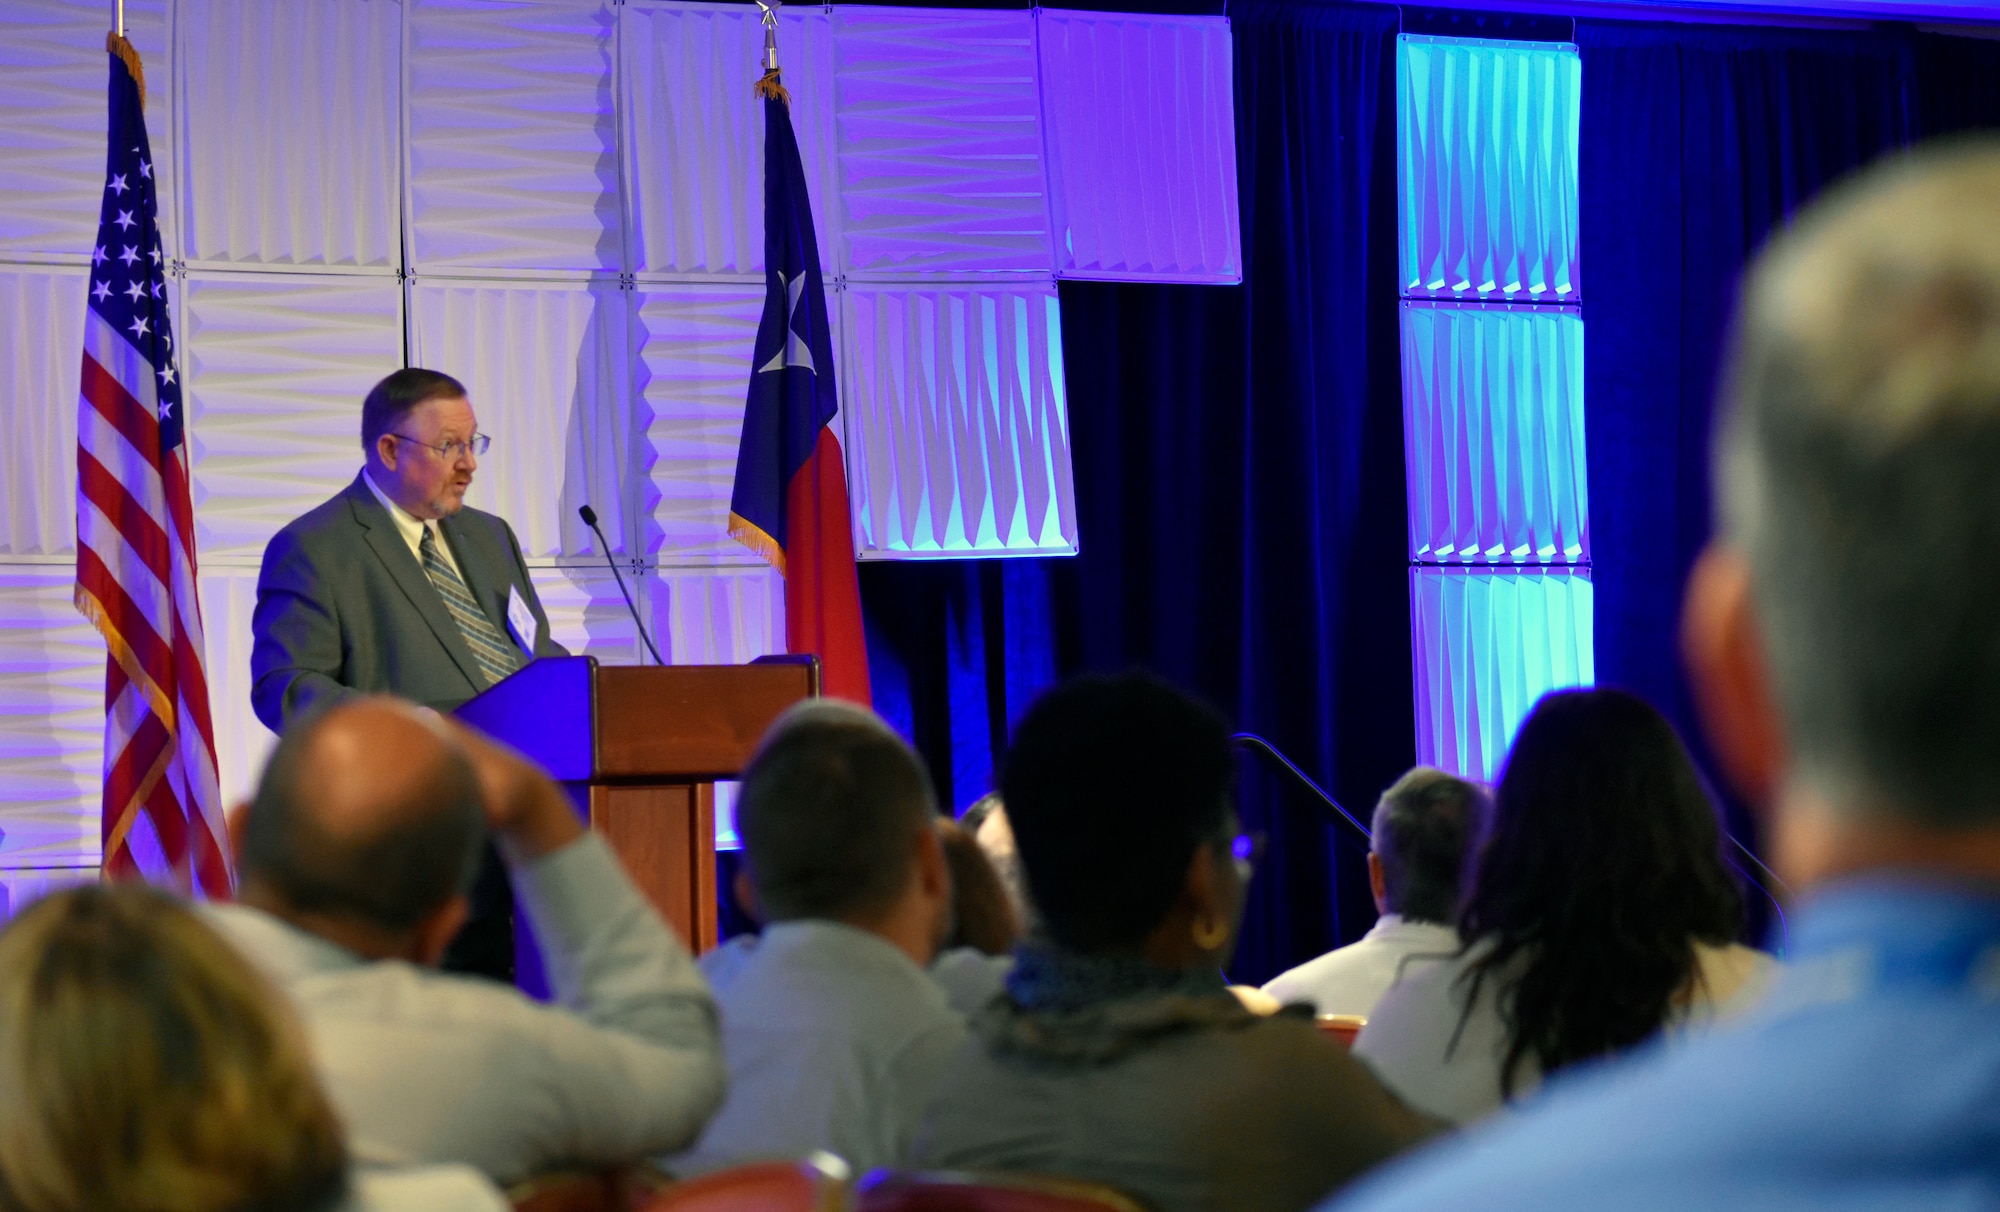 Building resilient installations was the theme of an Air Force Civil Engineer Center workshop that brought together environmental, public affairs and other base professionals August 13 to 15 in San Antonio.